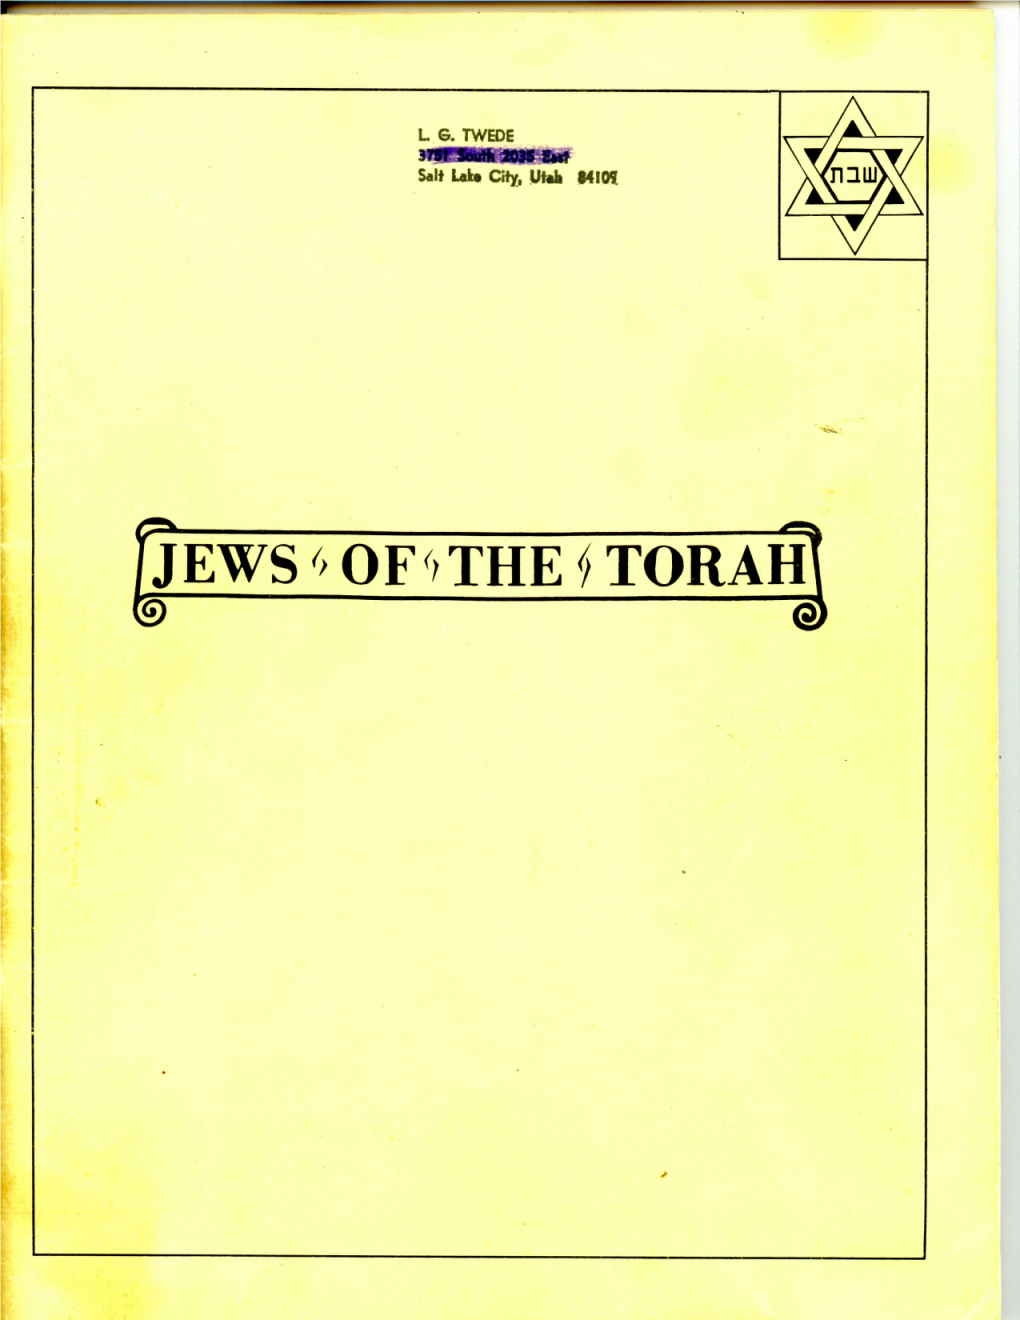 Jews of the Torah, by Early Member Irving Cohen